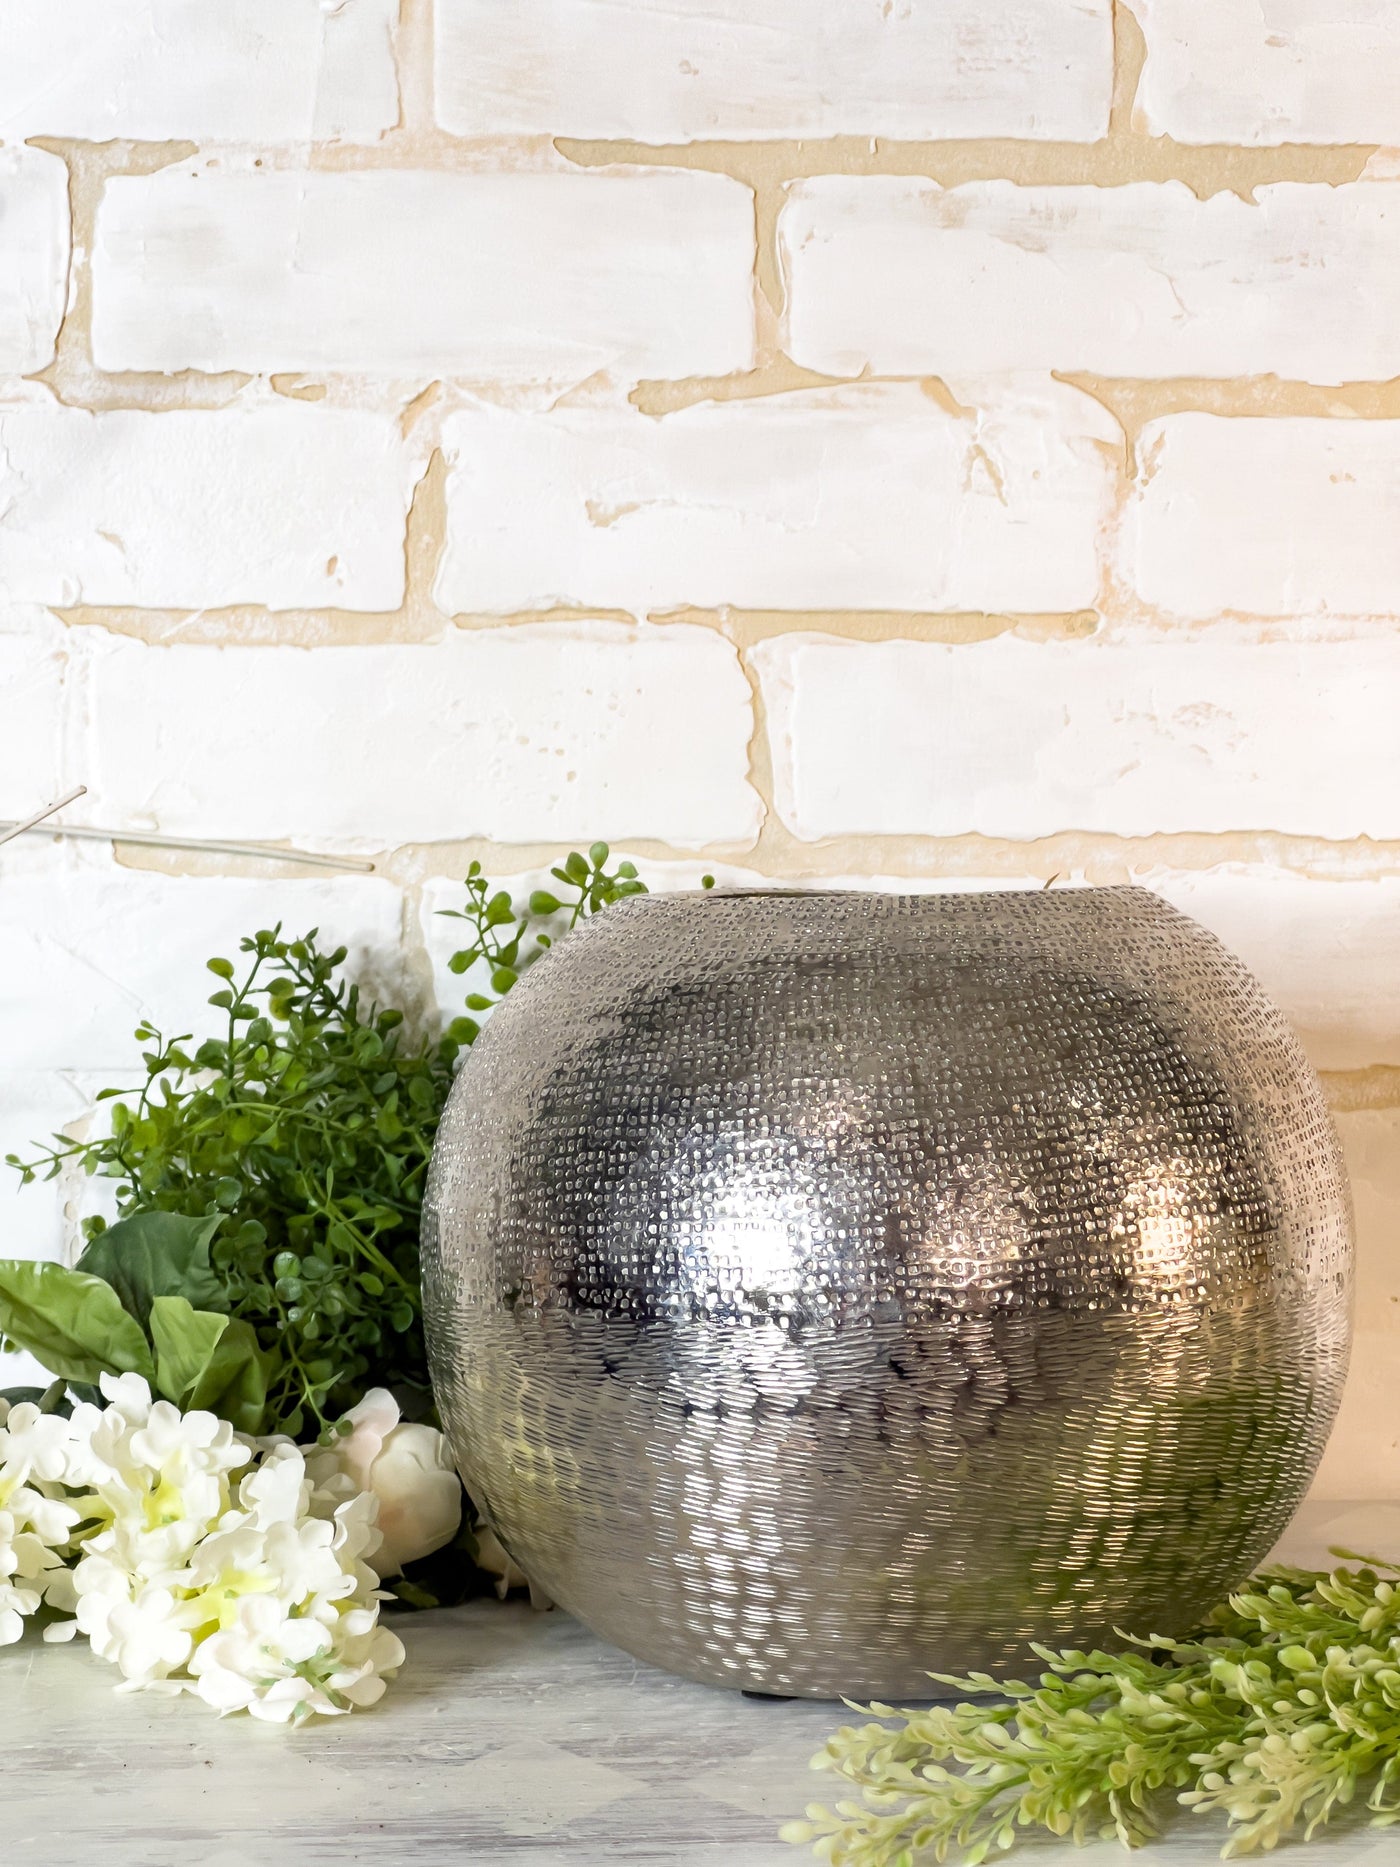 SILVER MODERN CHIC BALL VASE Revive In Style Vintage Furniture Painted Refinished Redesign Beautiful One of a Kind Artistic Antique Unique Home Decor Interior Design French Country Shabby Chic Cottage Farmhouse Grandmillenial Coastal Chalk Paint Metallic Glam Eclectic Quality Dovetailed Rustic Furniture Painter Pinterest Bedroom Living Room Entryway Kitchen Home Trends House Styles Decorating ideas